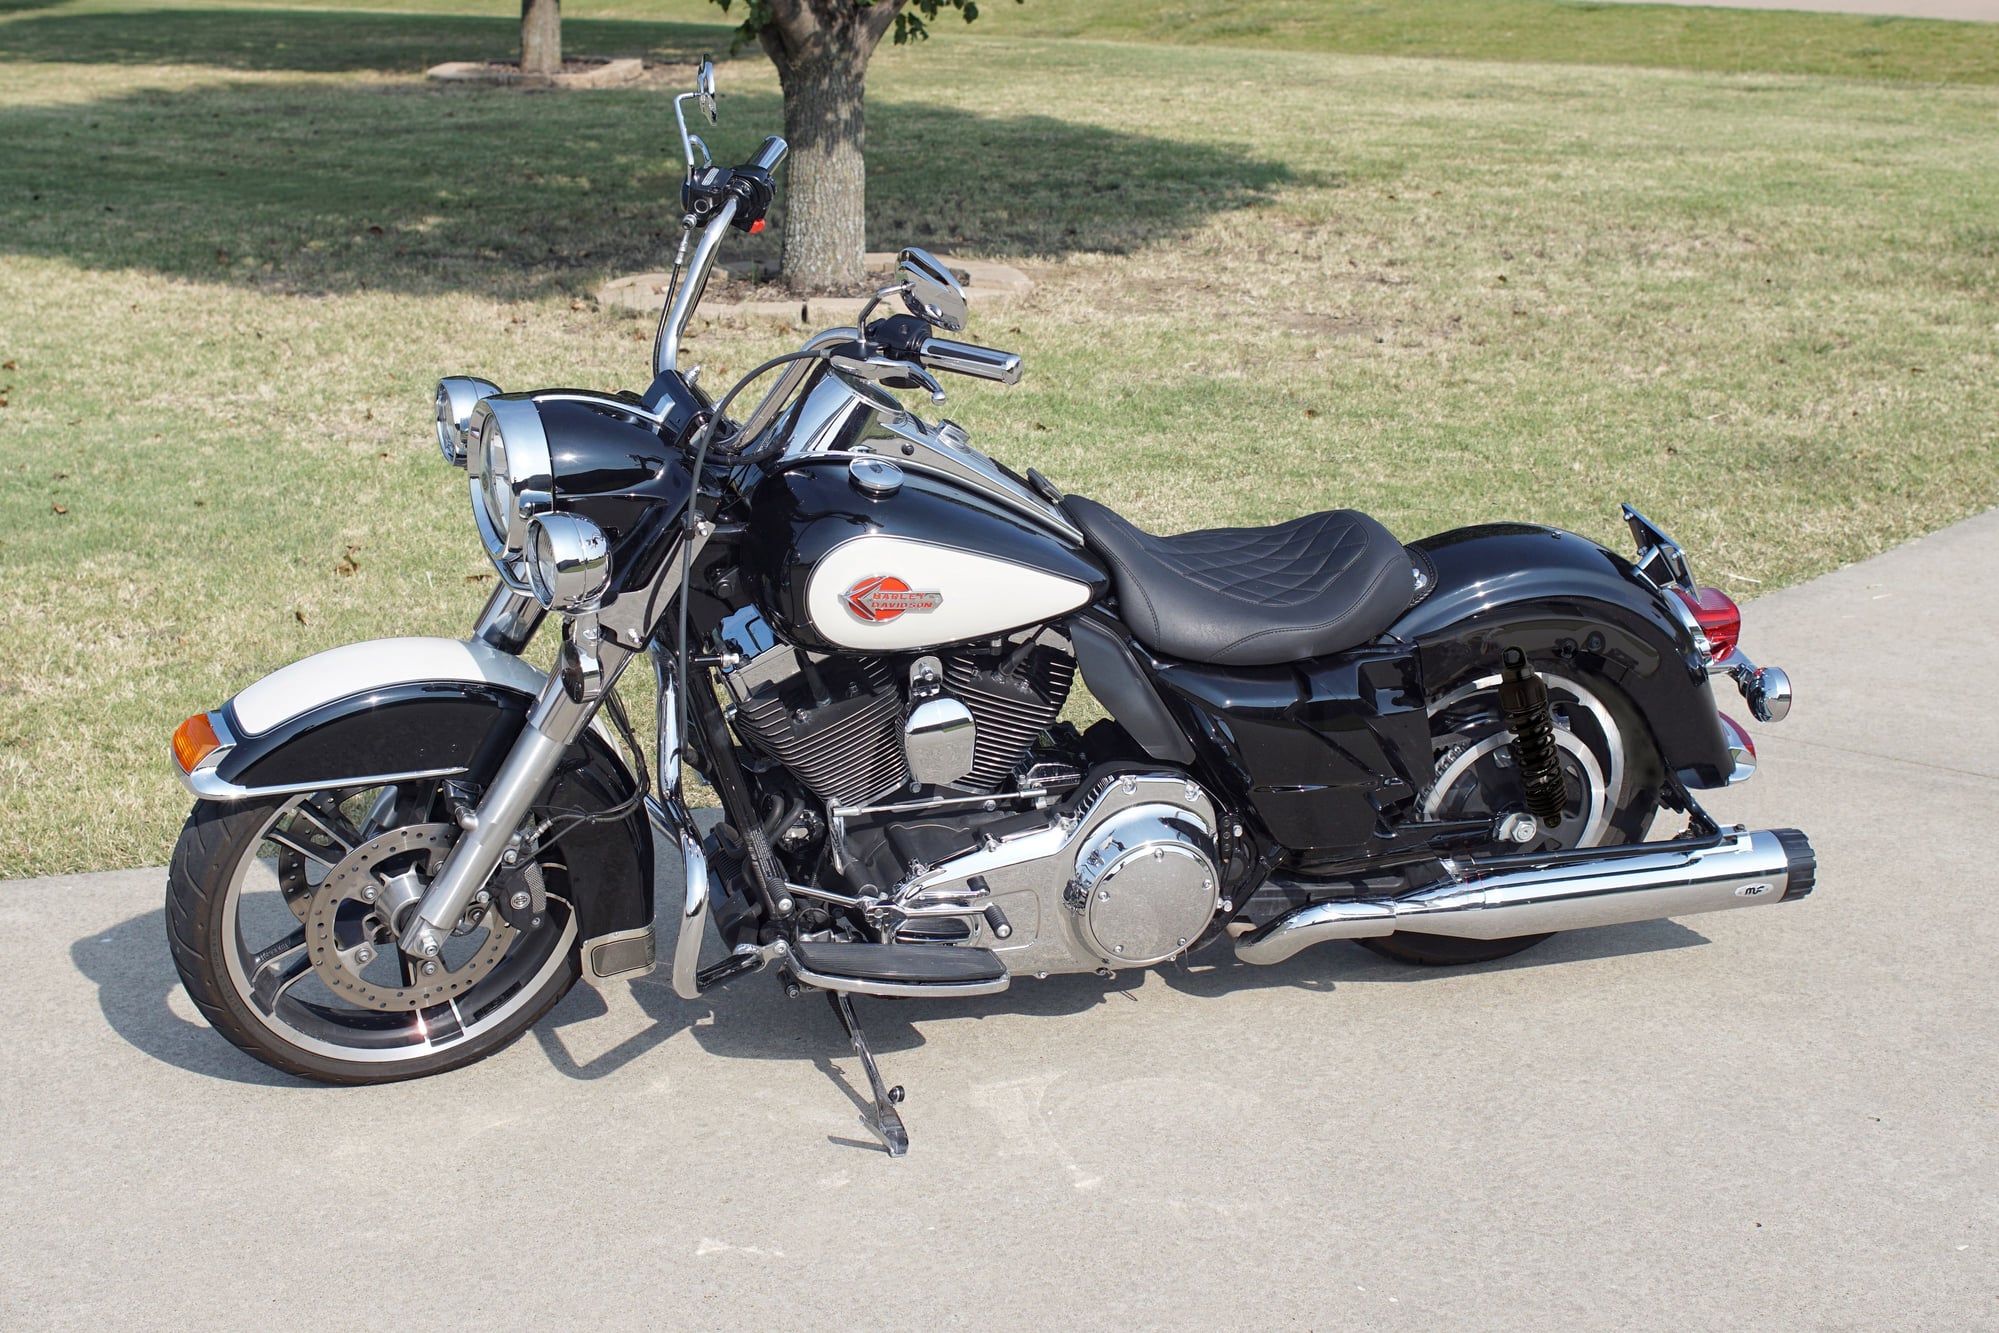 2014 Road King - Bagless and other mods.